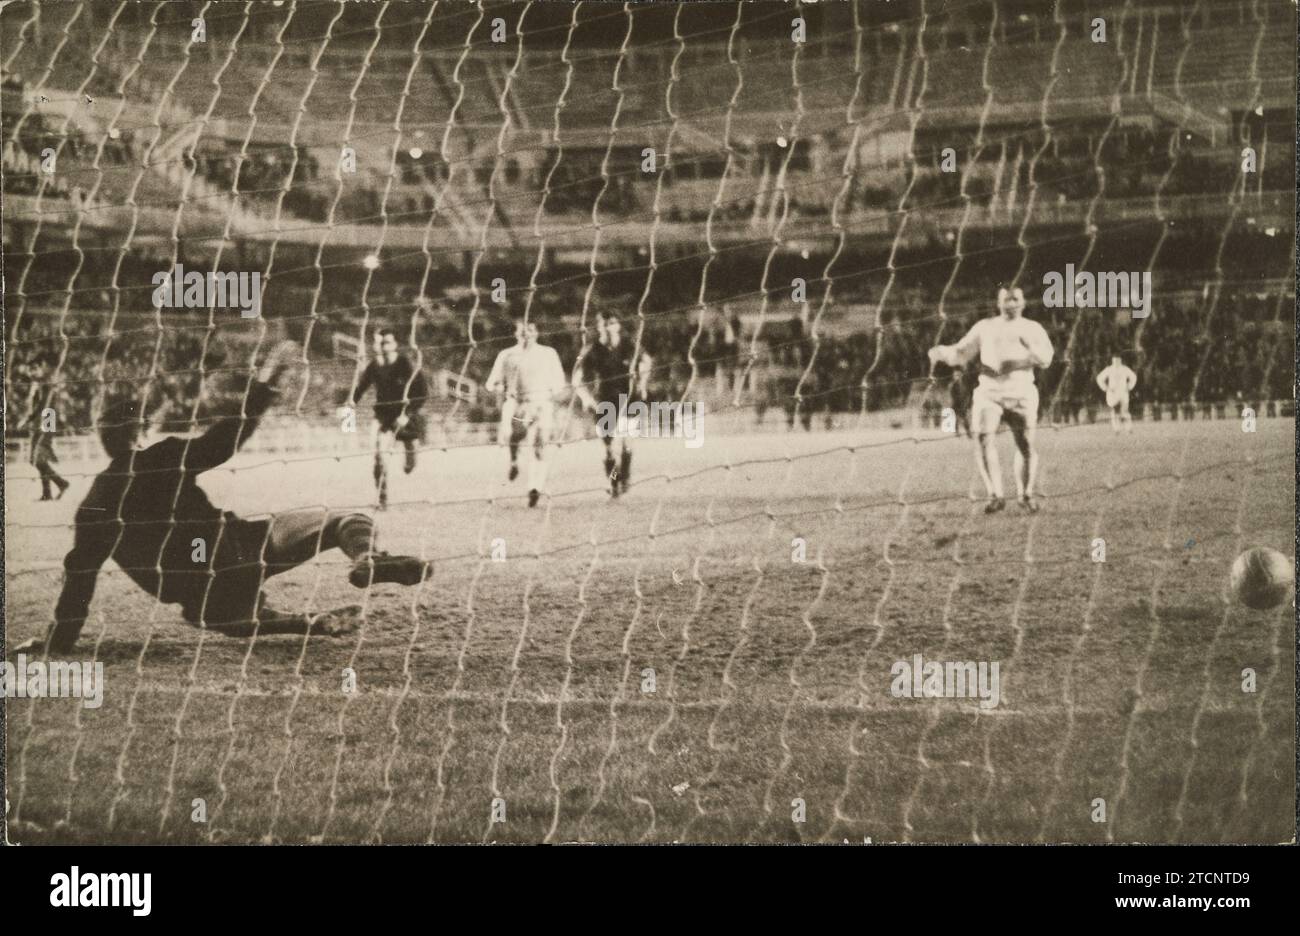 09/05/2022. Madrid, 12/15/1963. League match matchday 12 played at the Santiago Bernabéu stadium, between Real Madrid and Barcelona, which ended with the local victory 4 to 0. In the image, Puskas scores the 4th goal from a penalty. Credit: Album / Archivo ABC / Albero y Segovia Stock Photo